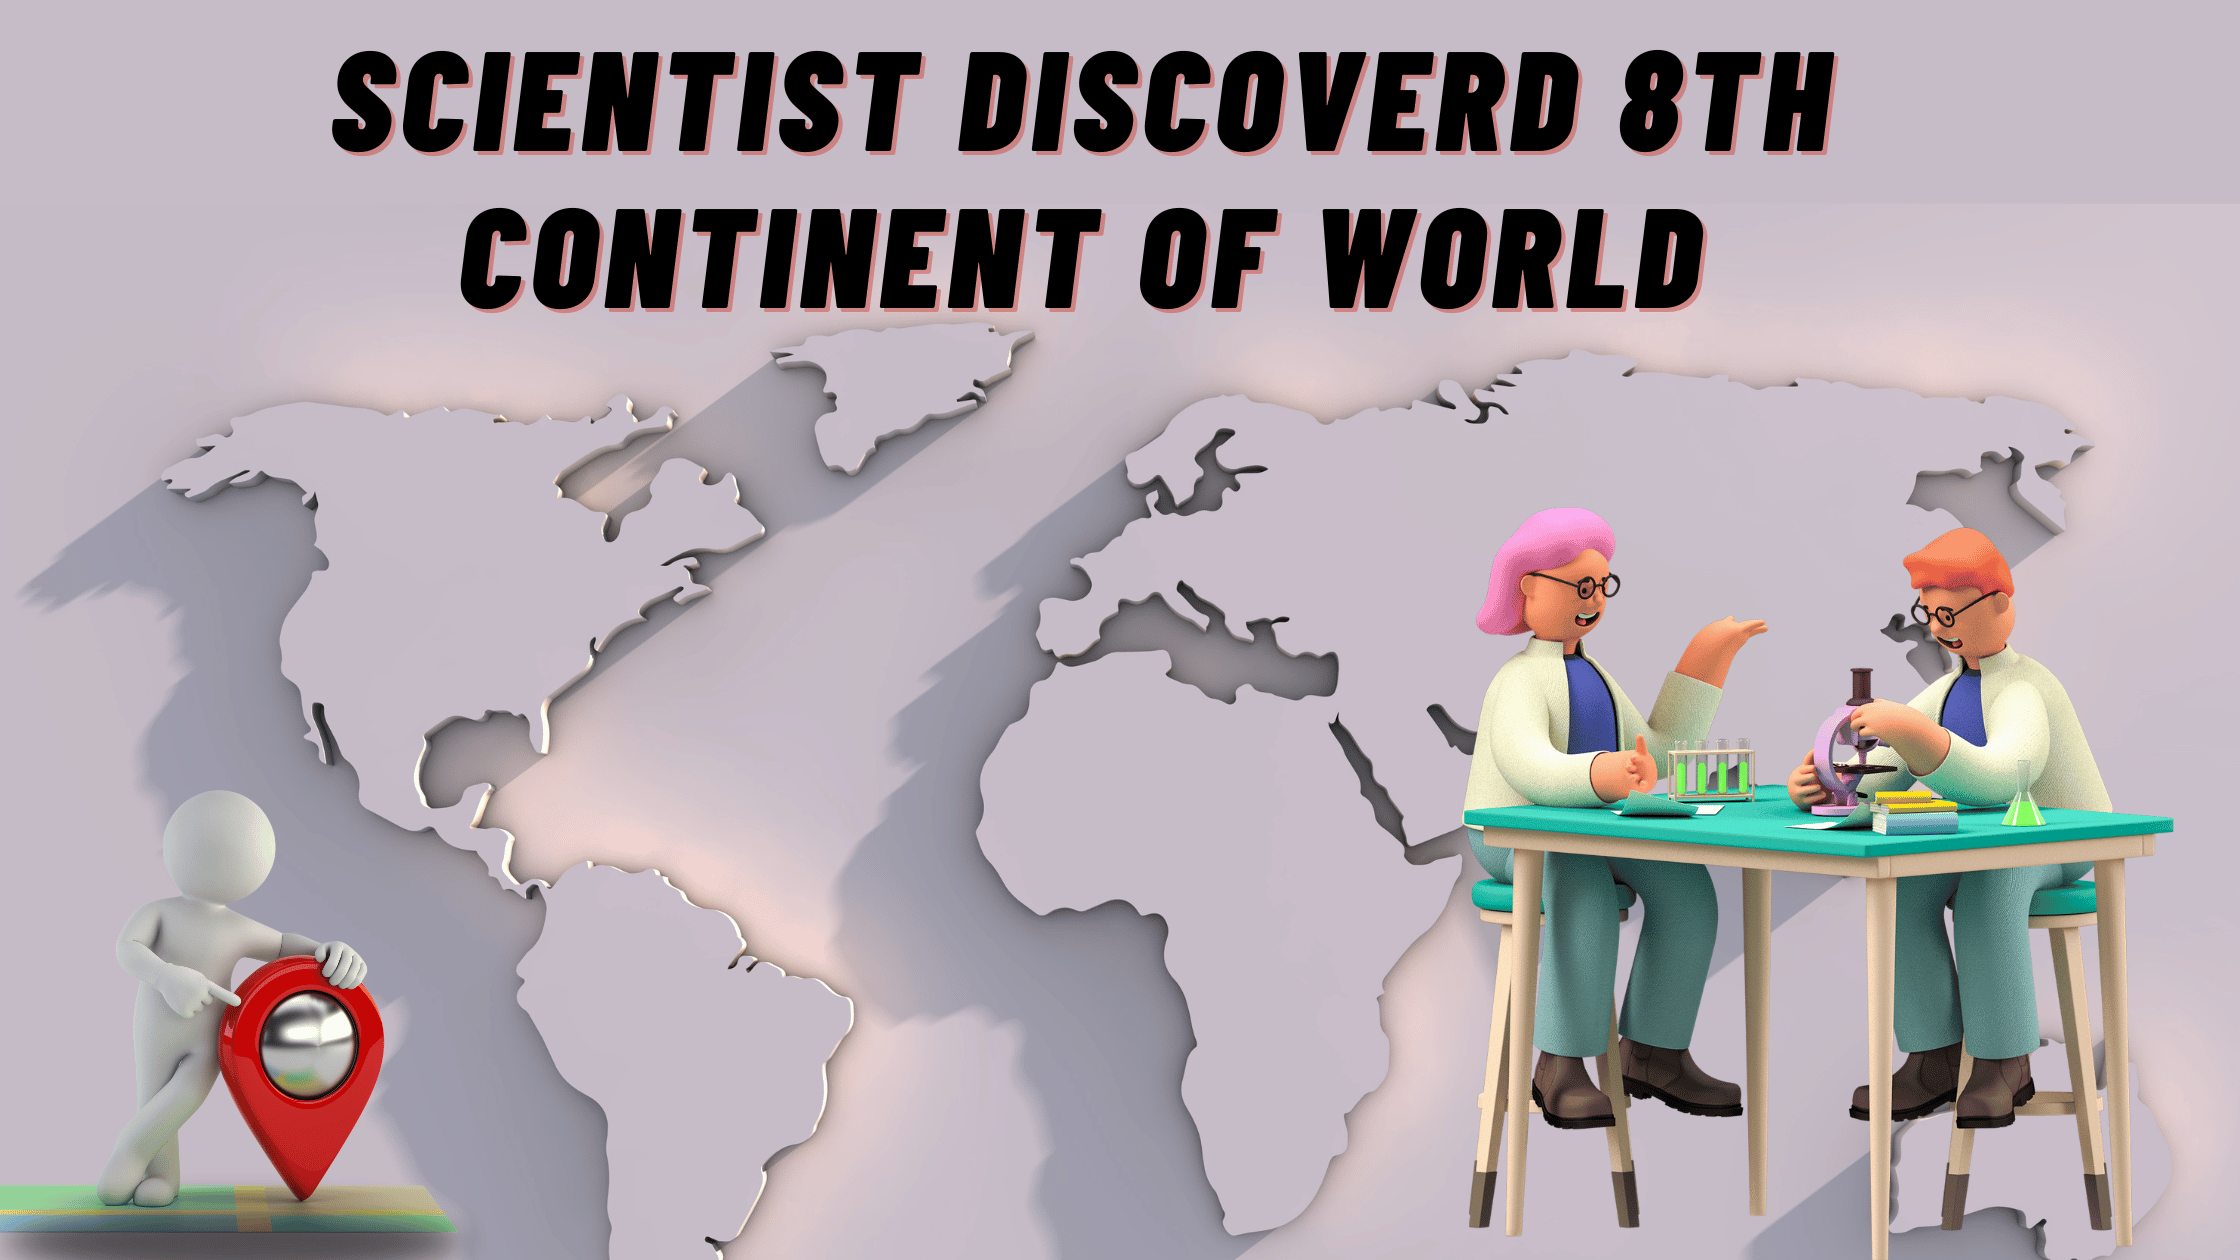 Scientist Discoverd 8th Continent of world